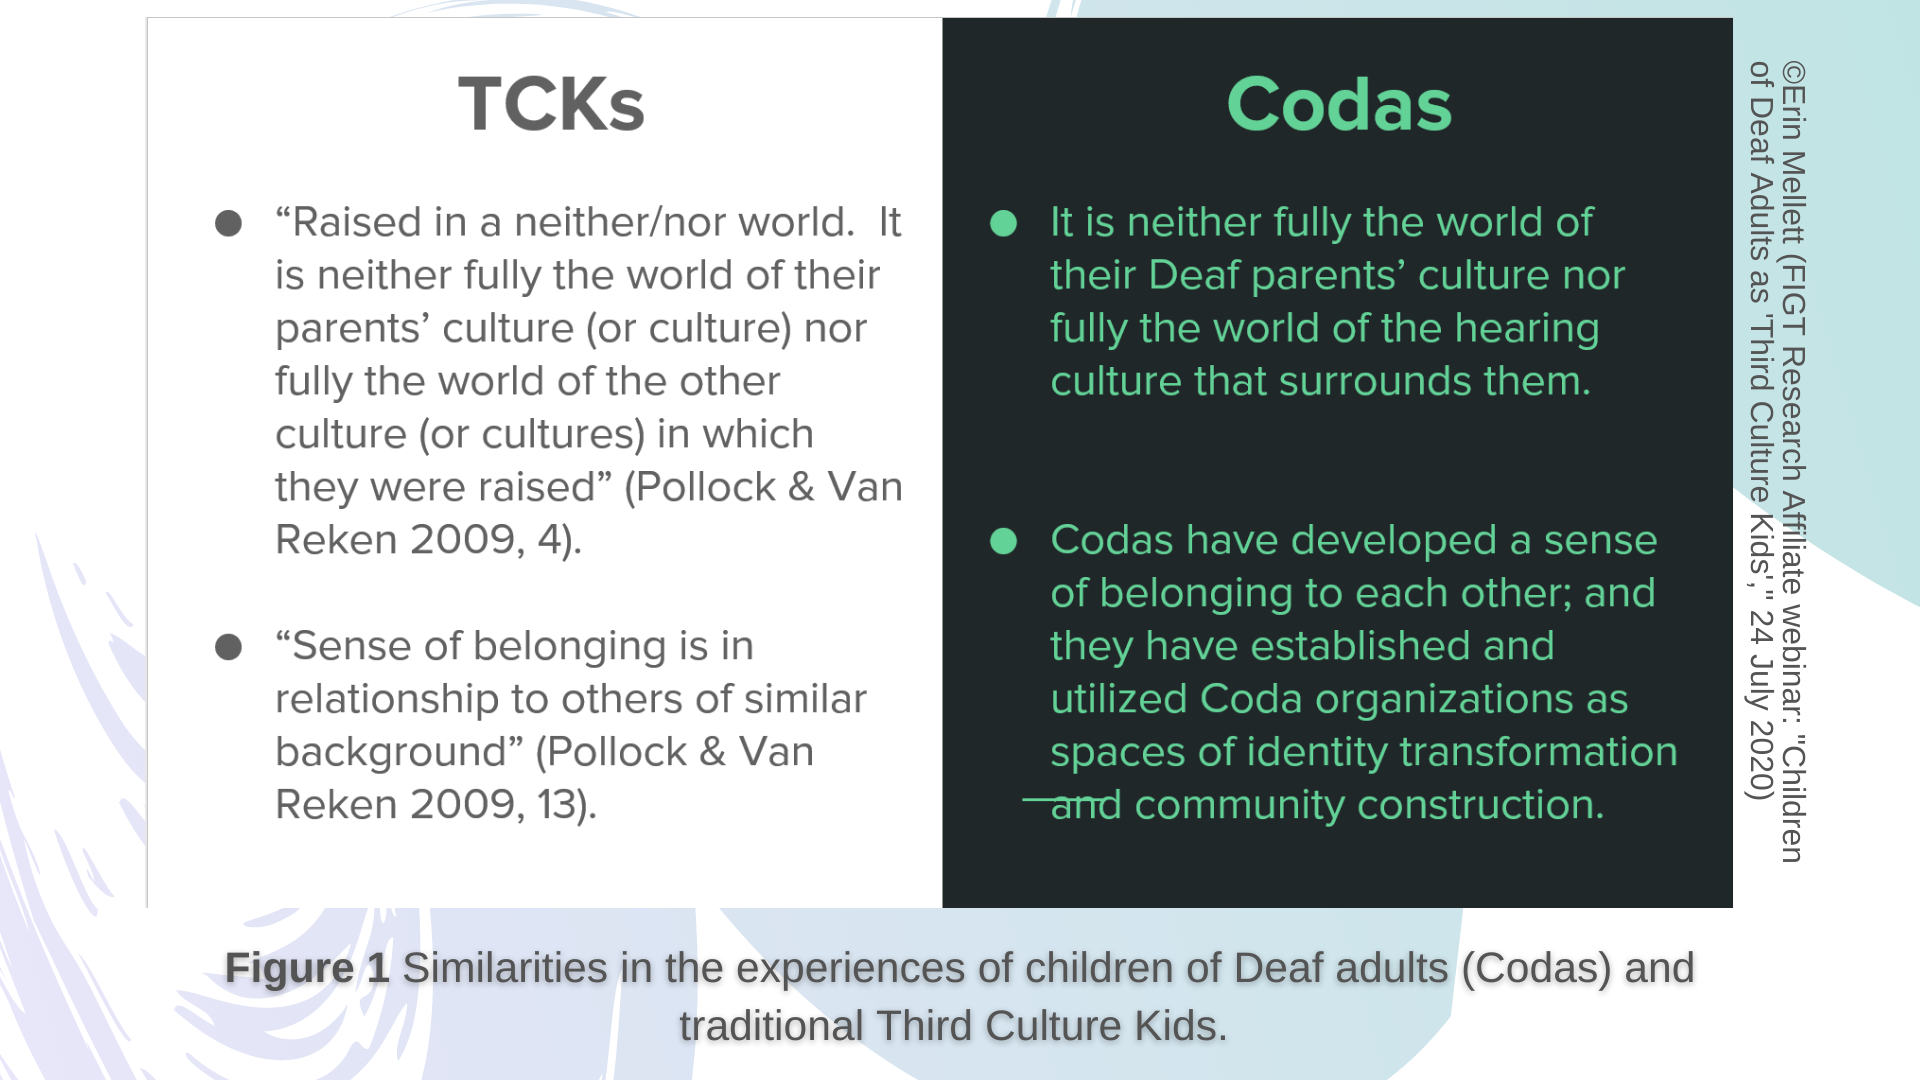 A table comparing TCKs and Codas. For TCKS: “Raised in a neither/nor world. It is neither fully the world of their parents’ culture (or culture) nor fully the world of the other culture (or cultures) in which they were raised” (Pollock & Van Reken 2009, 4). “Sense of belonging is in relationship to others of similar background” (Pollock & Van Reken 2009, 13). For Codas: It is neither fully the world of their Deaf parents’ culture nor fully the world of the hearing culture that surrounds them. Codas have developed a sense of belonging to each other; and they have established and utilized Coda organizations as spaces of identity transformation and community construction.